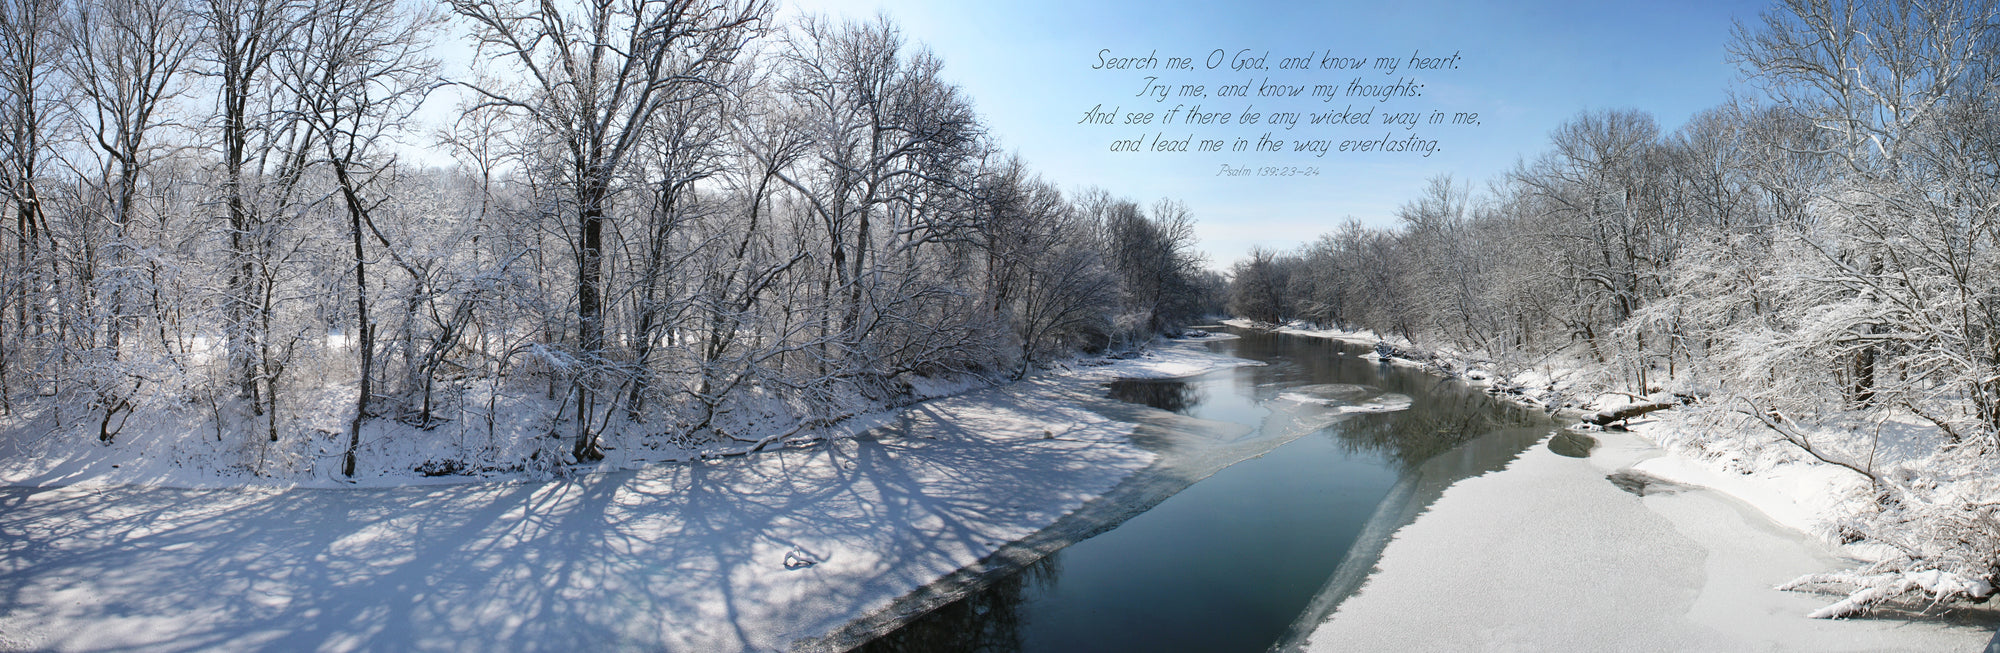 Frozen Stillwater River at Horseshoe Bend Road in Winter with scripture verse